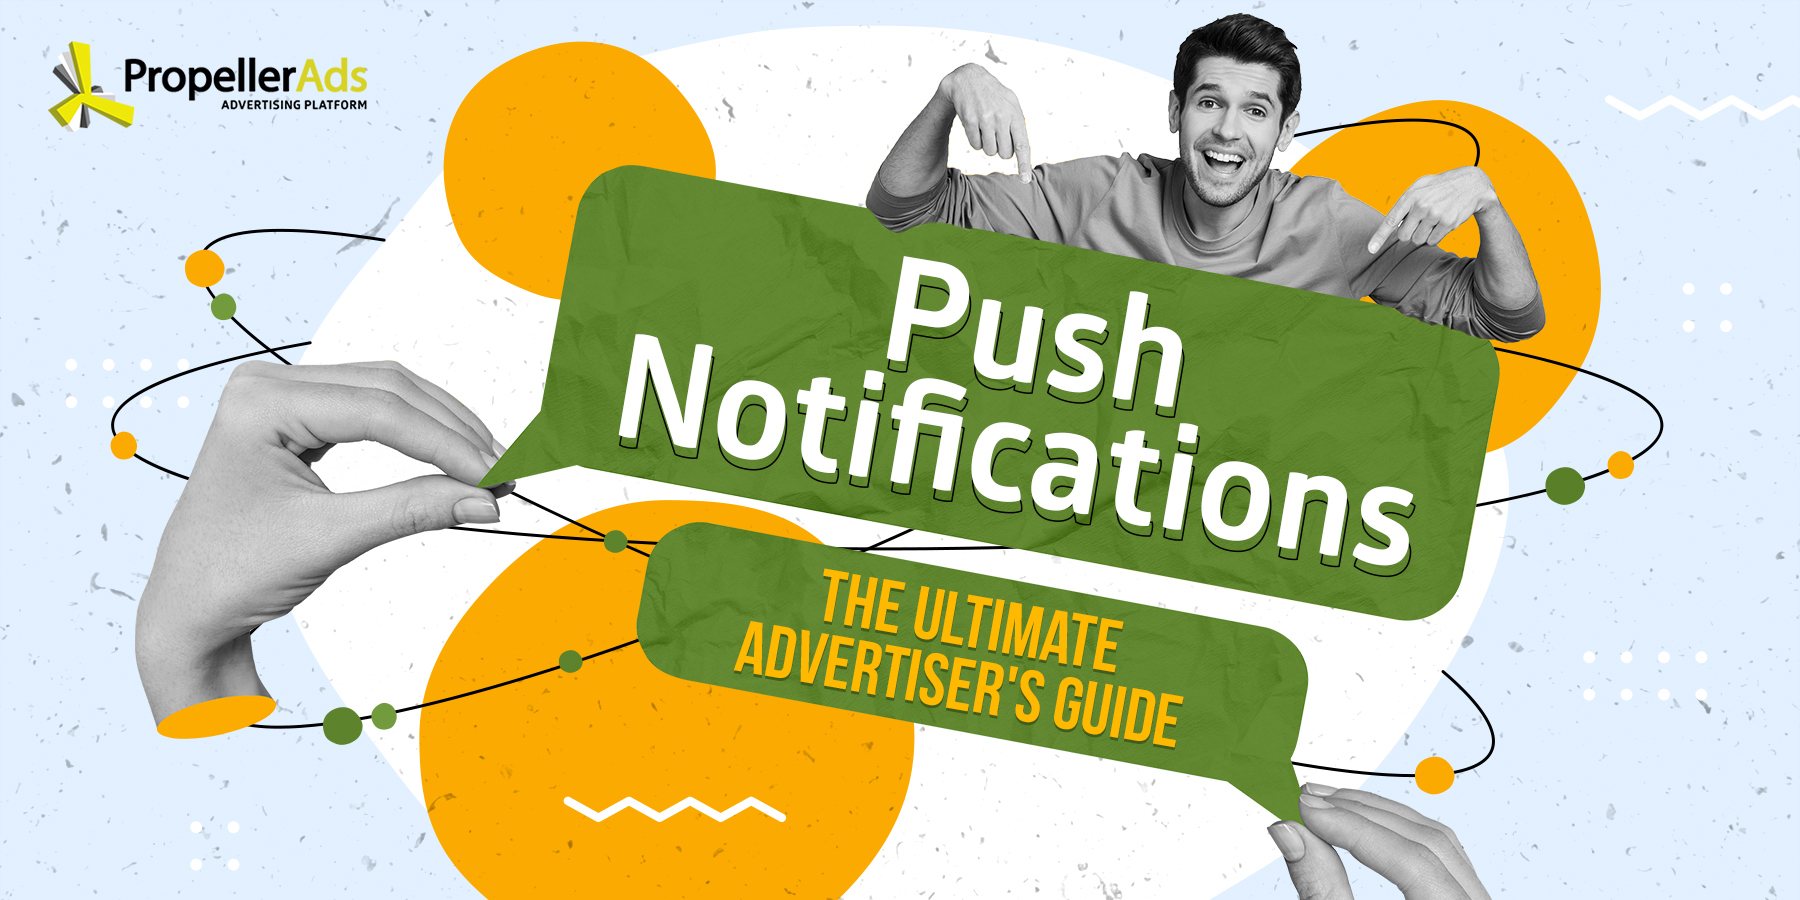 Much has been written about Push notifications & Push strategies in this blog (and not only). However, there are still so many ways to make your Push campaigns maximally efficient that we continue sharing strategies and tips tirelessly. For example, this time, we decided to reveal the secret recipe of combining various Push tools, like